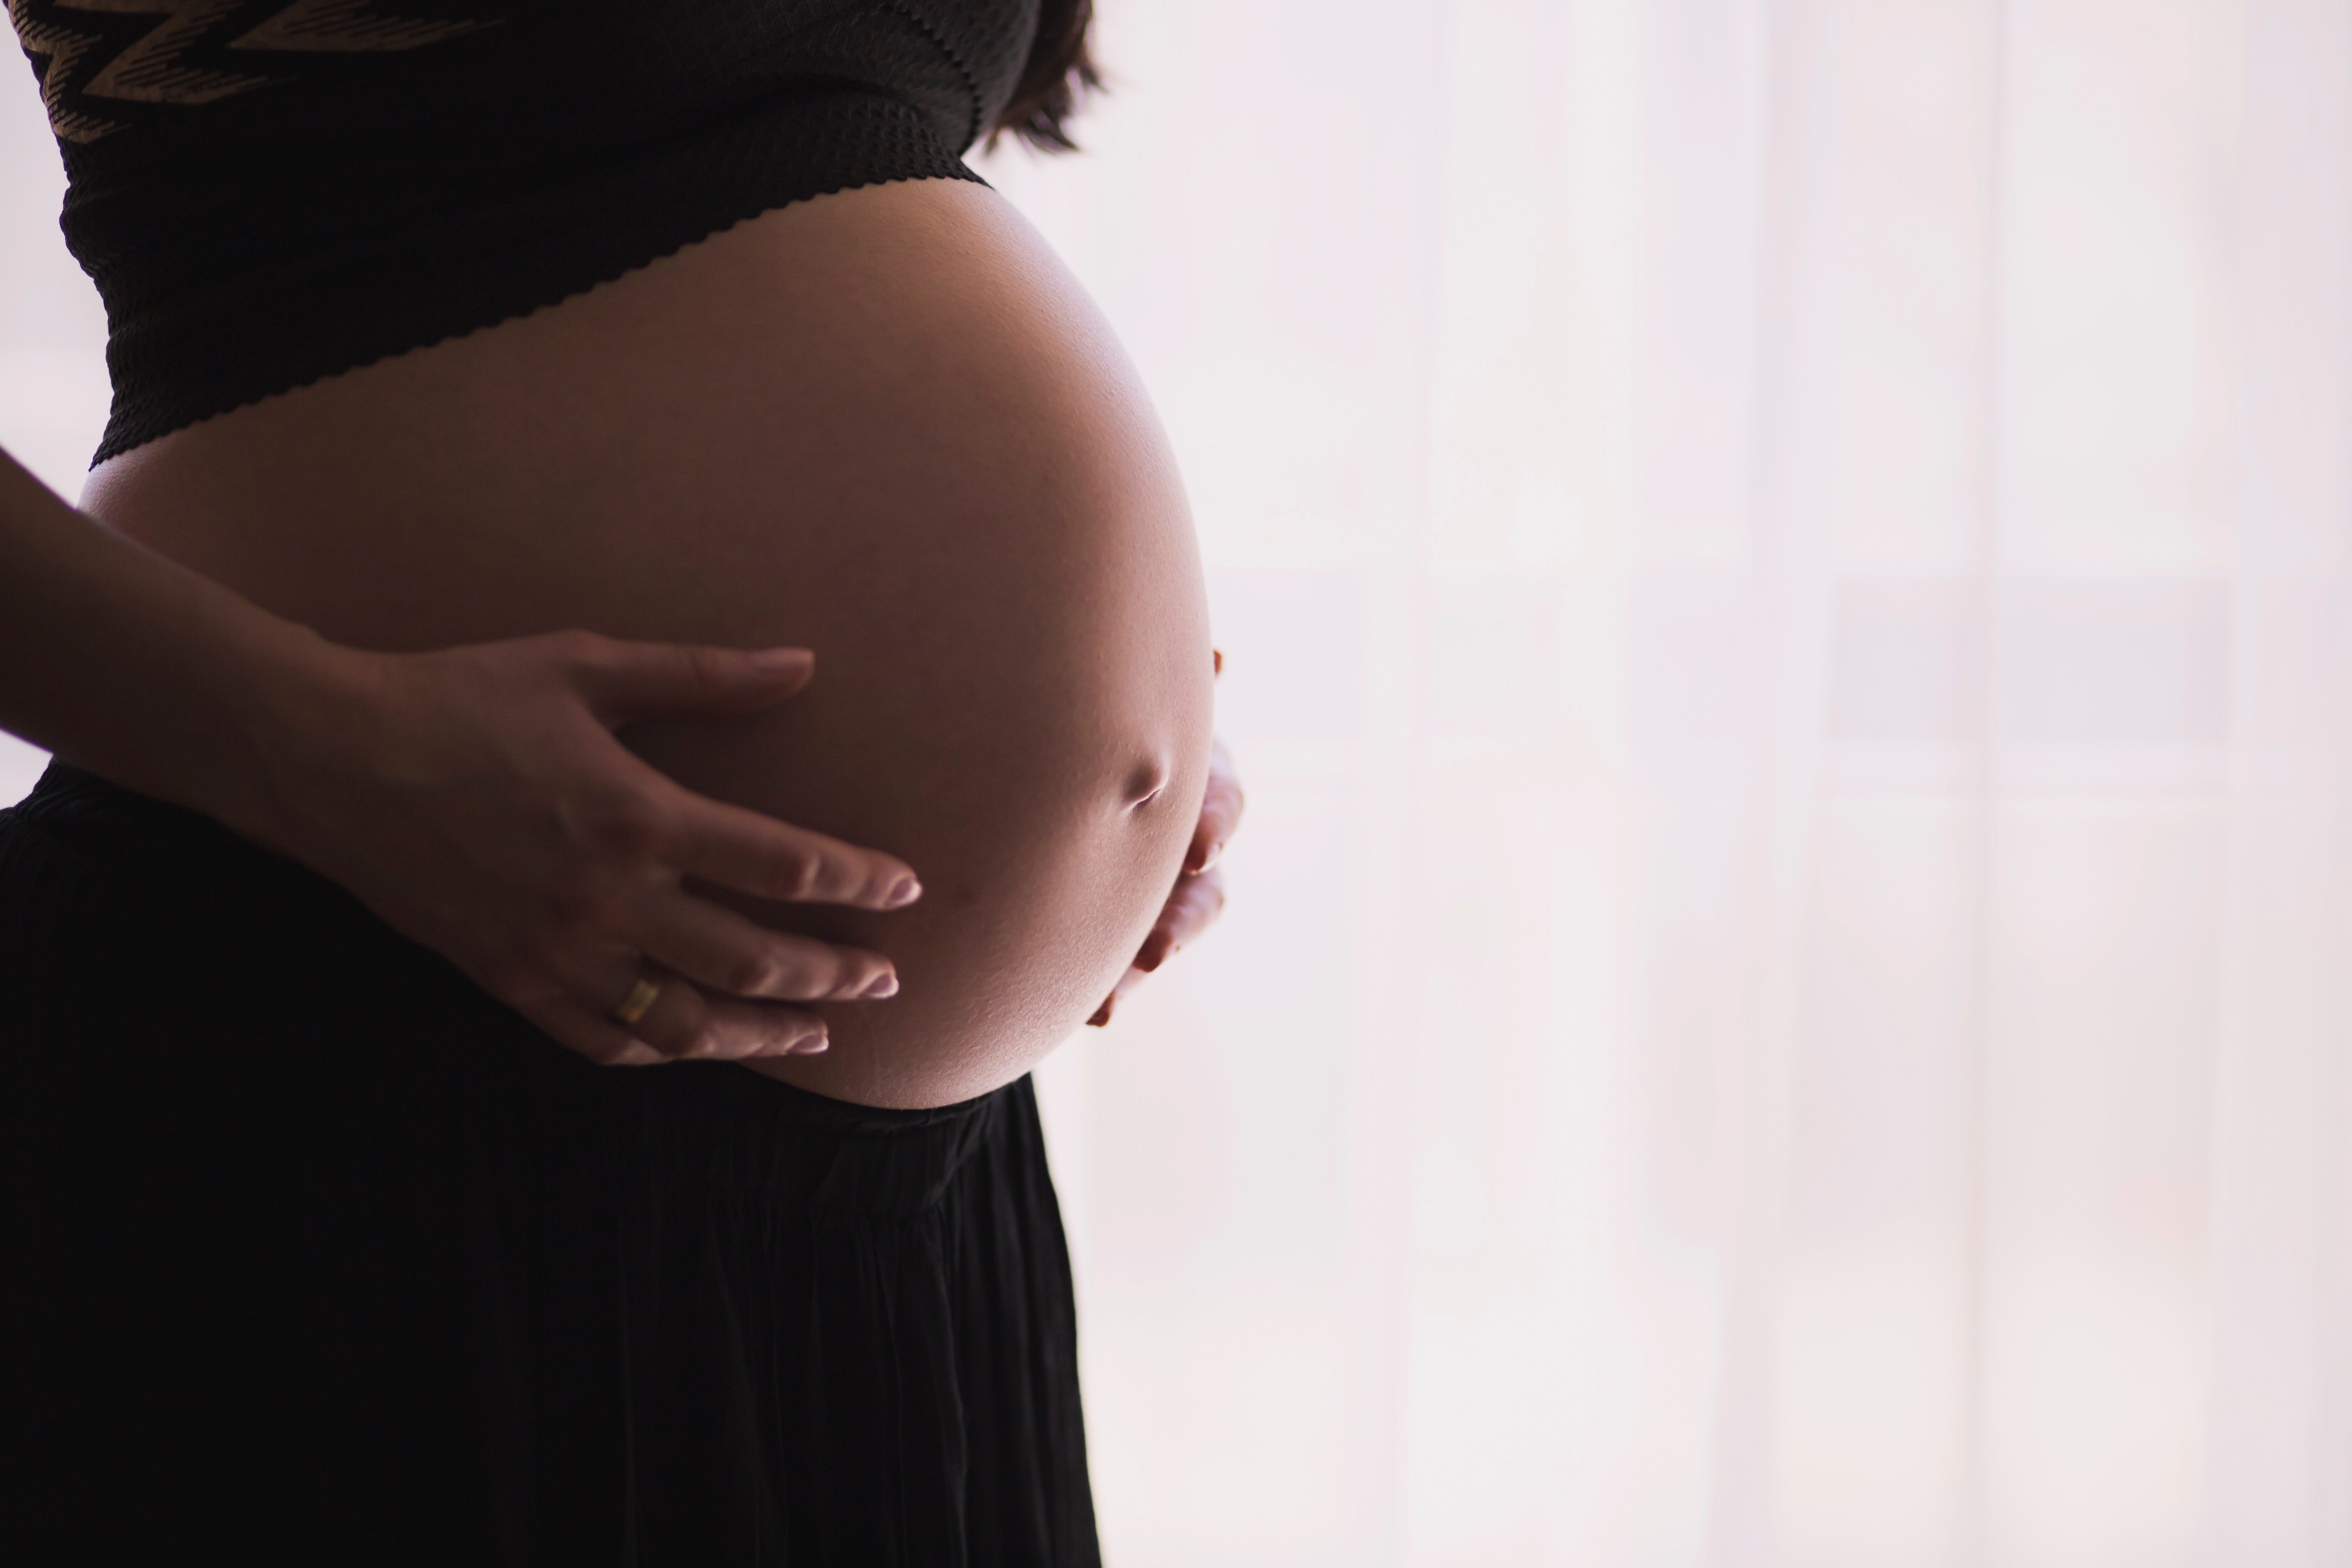 Allison started having contractions at 28 weeks. | Source: Pexels